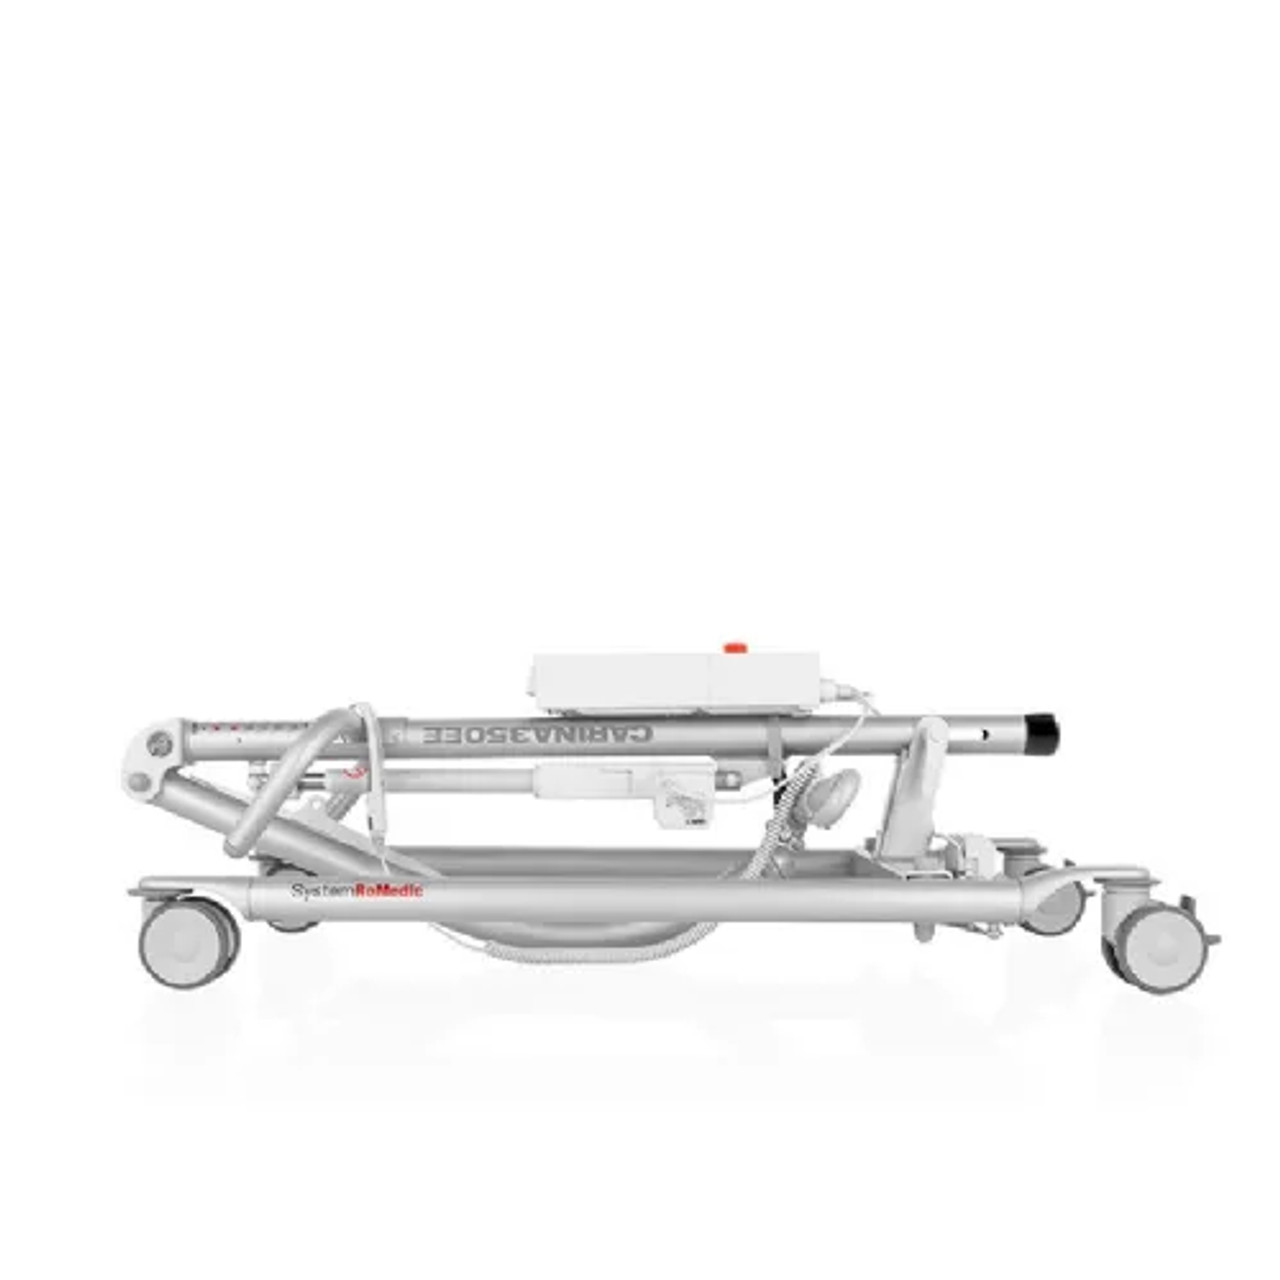 Carina 350 Compact Folding Mobile Patient Lift - Lightweight, Foldable-Chicken Pieces